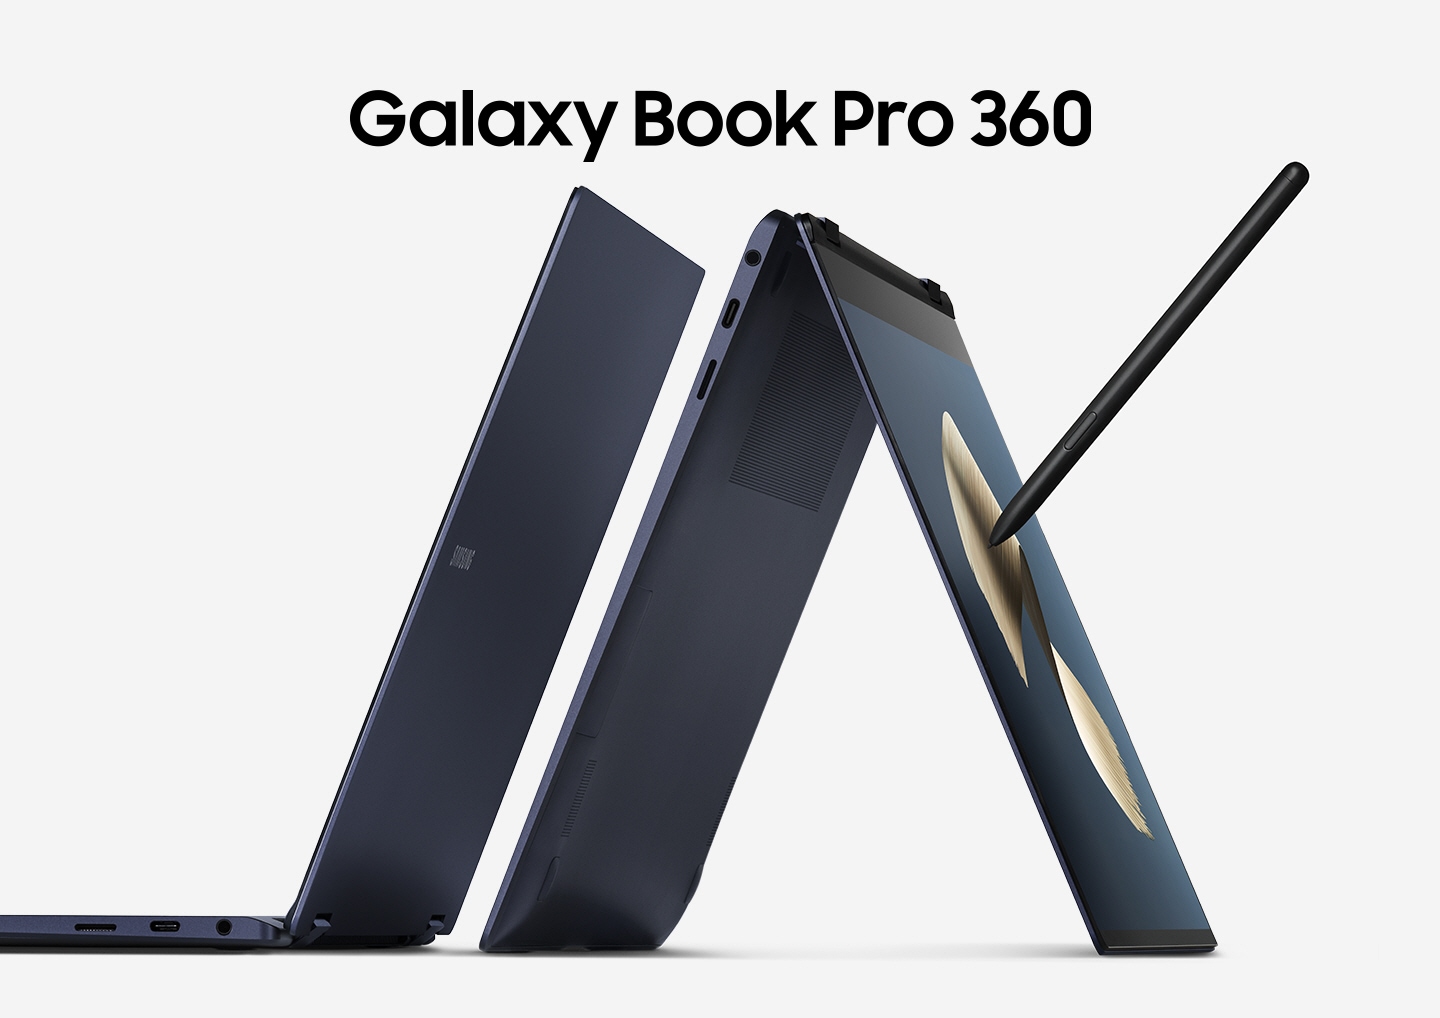 Two identical Galaxy Book Pro 360s in Mystic Navy are placed side by side. One is featuring S Pen, in tent mode resting on edge of screen and keyboard. 'Galaxy Book Pro 360' is written.